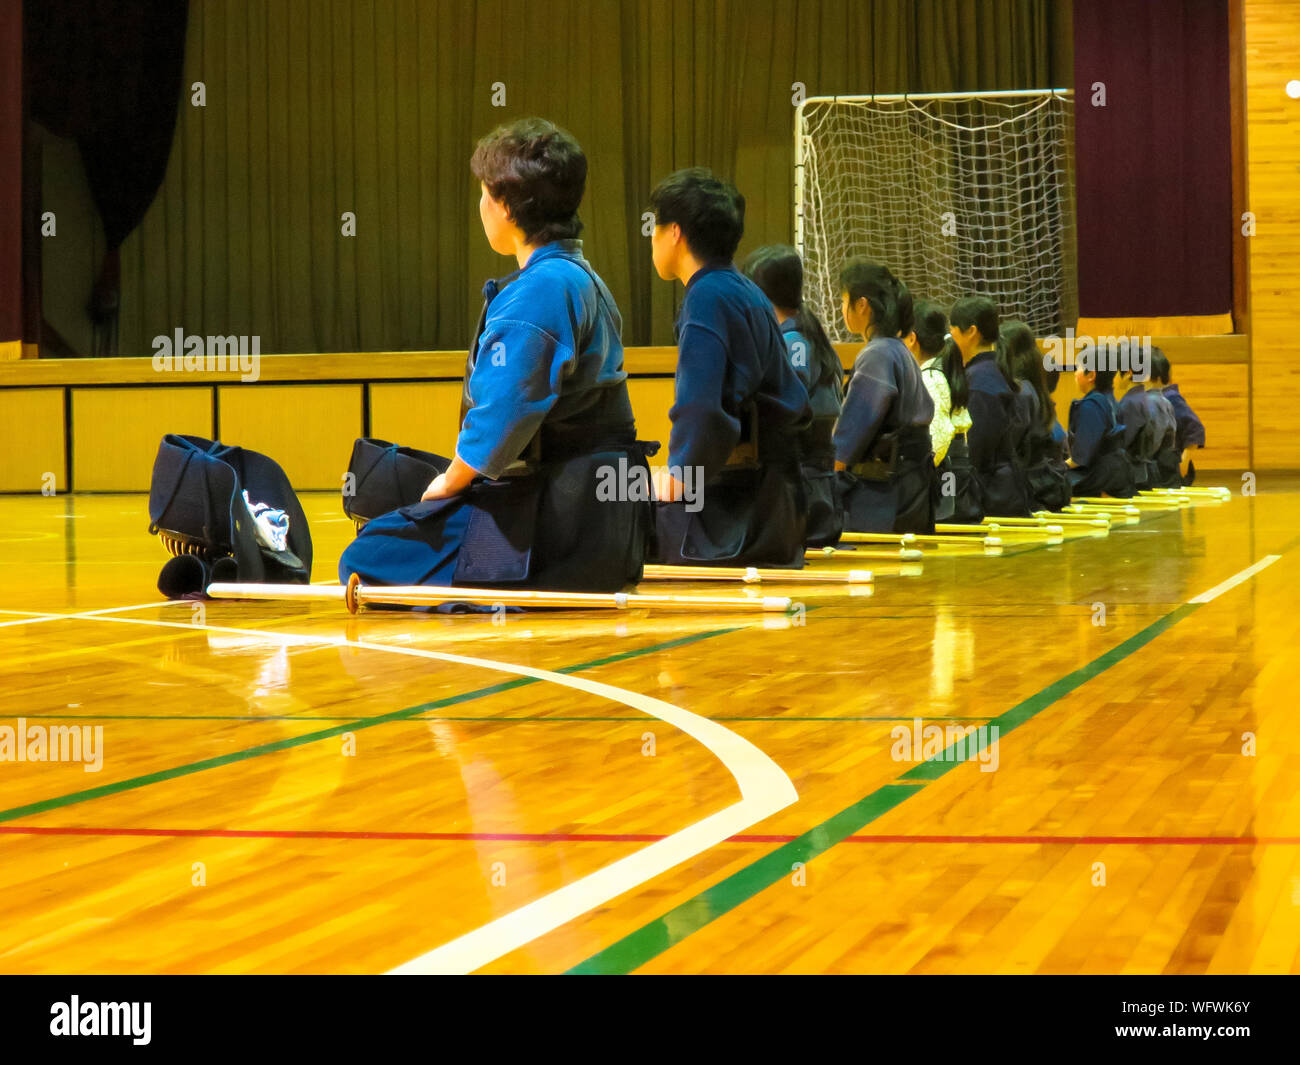 Martial Art Student Sitting In Row Learning Principles Of Self Defence Art Stock Photo